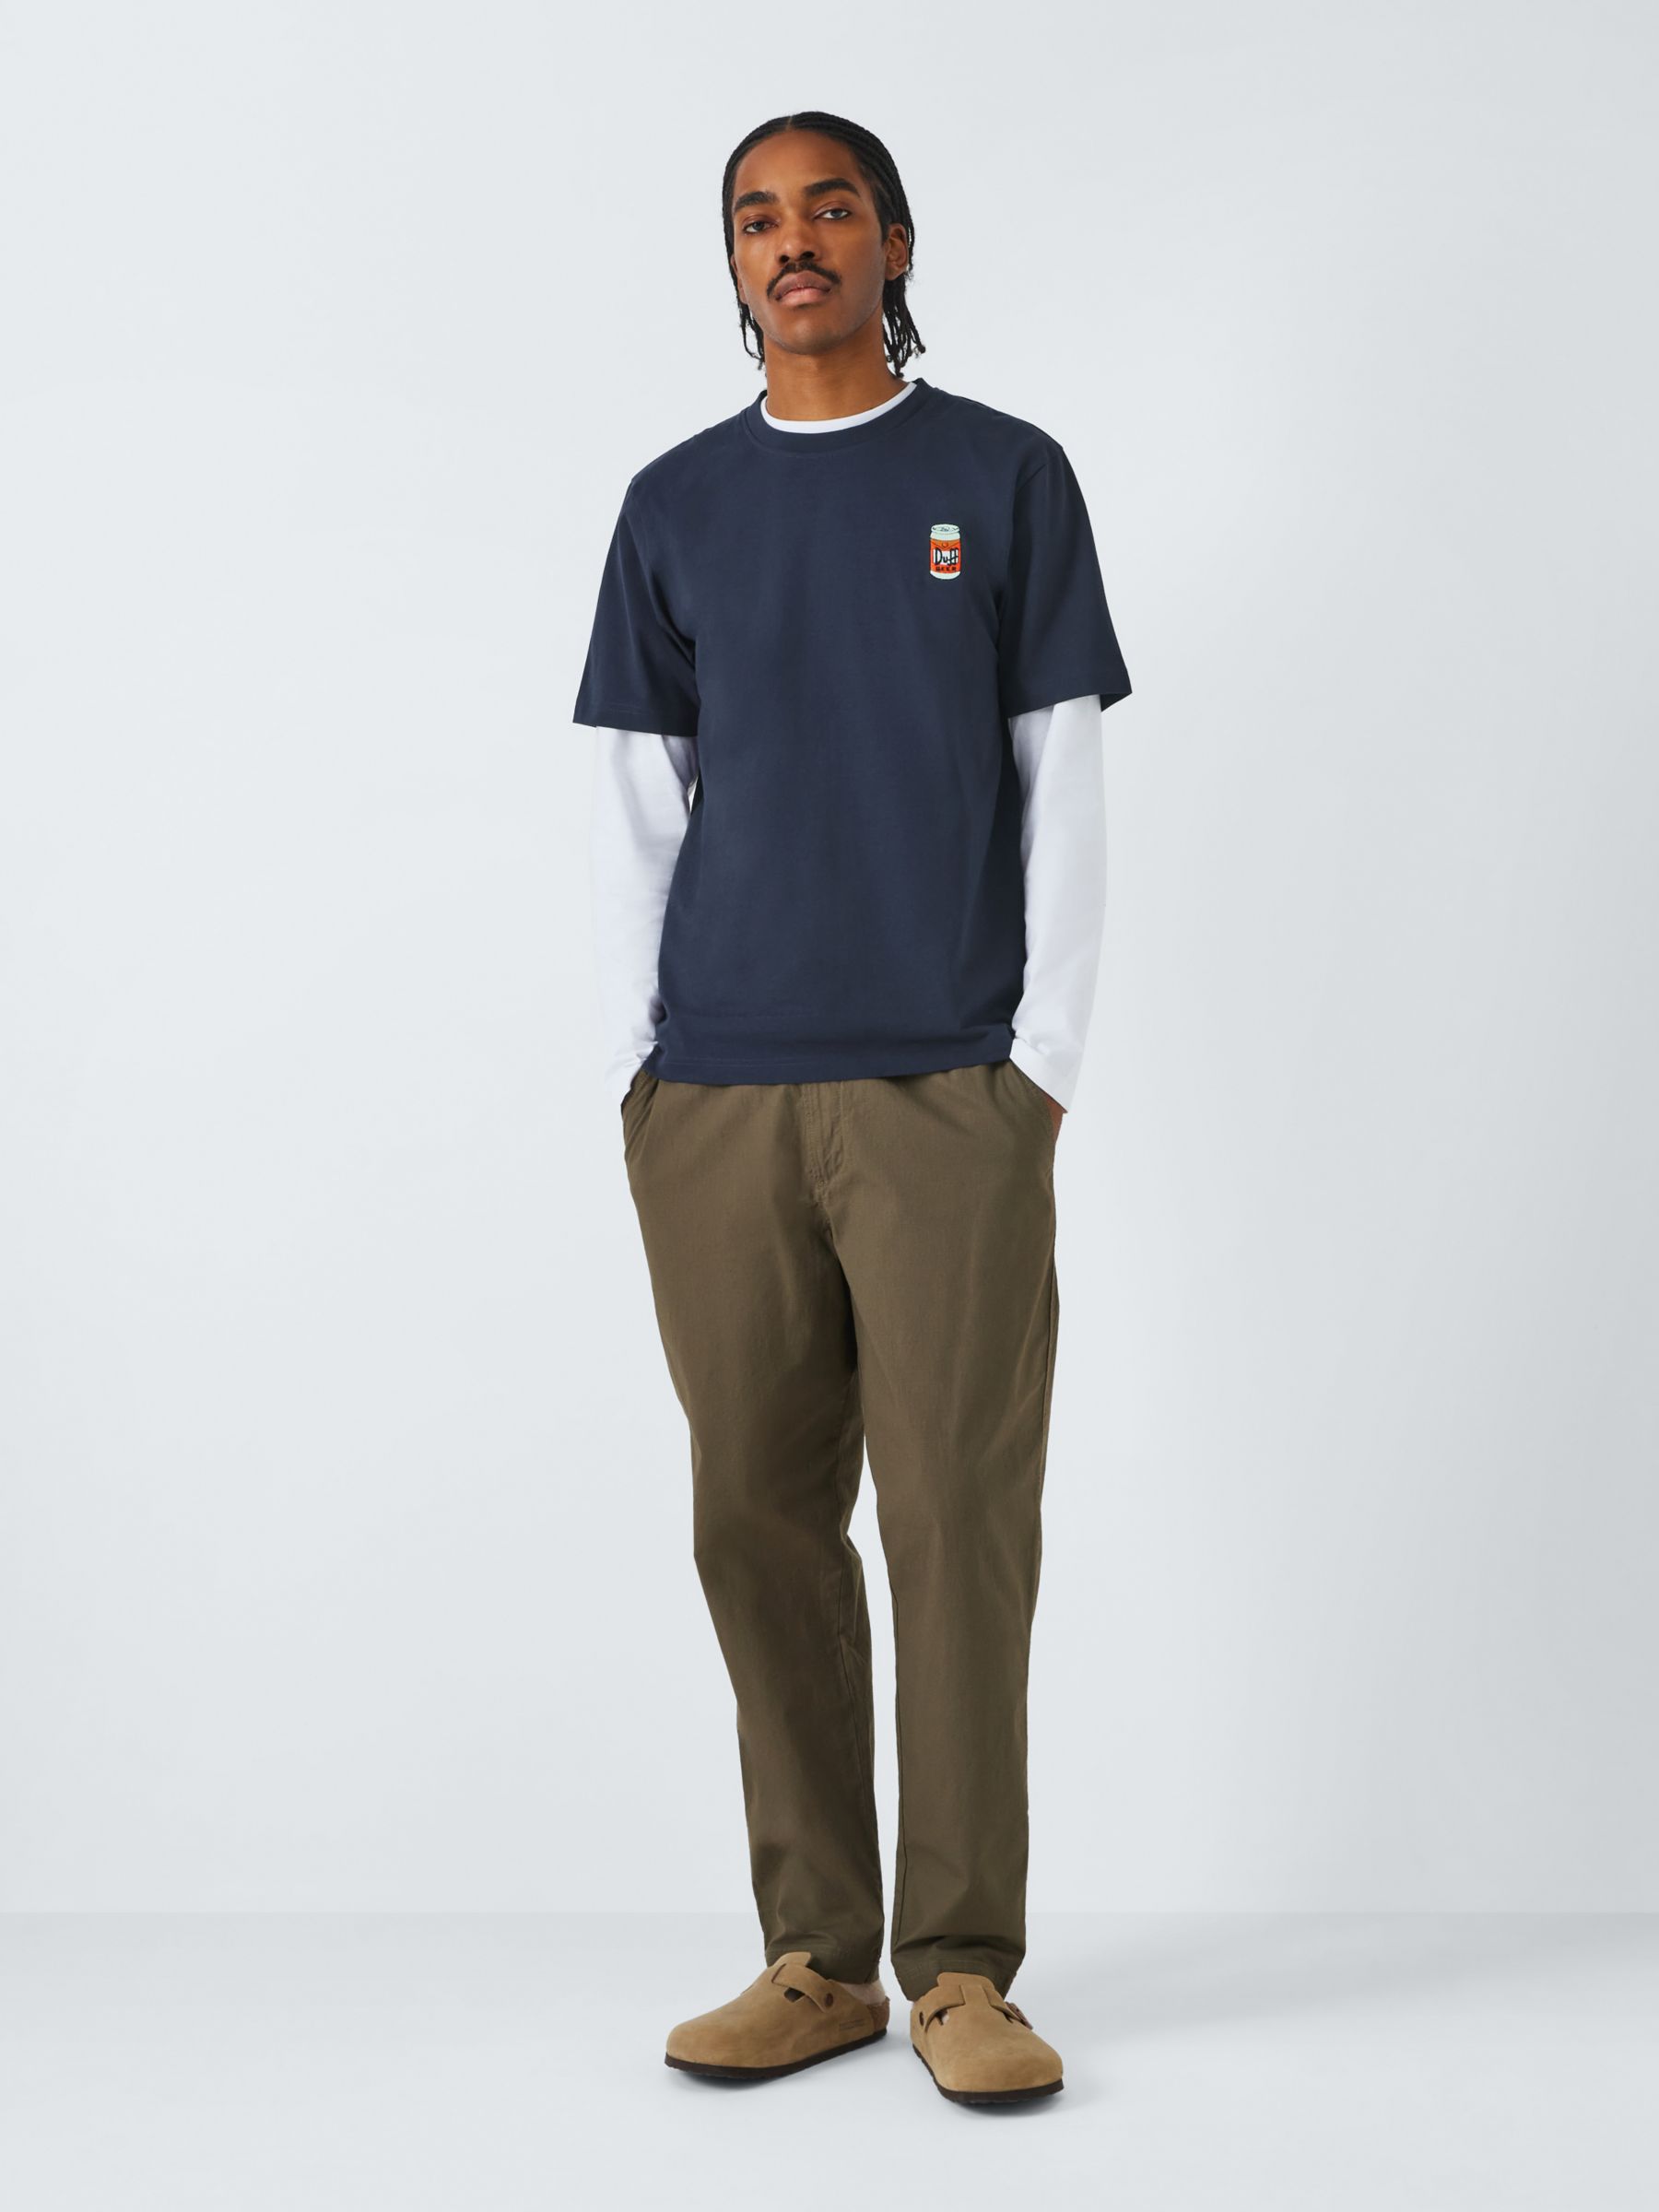 Buy John Lewis ANYDAY X The Simpsons Duff Beer Short Sleeve T-Shirt, Navy Online at johnlewis.com